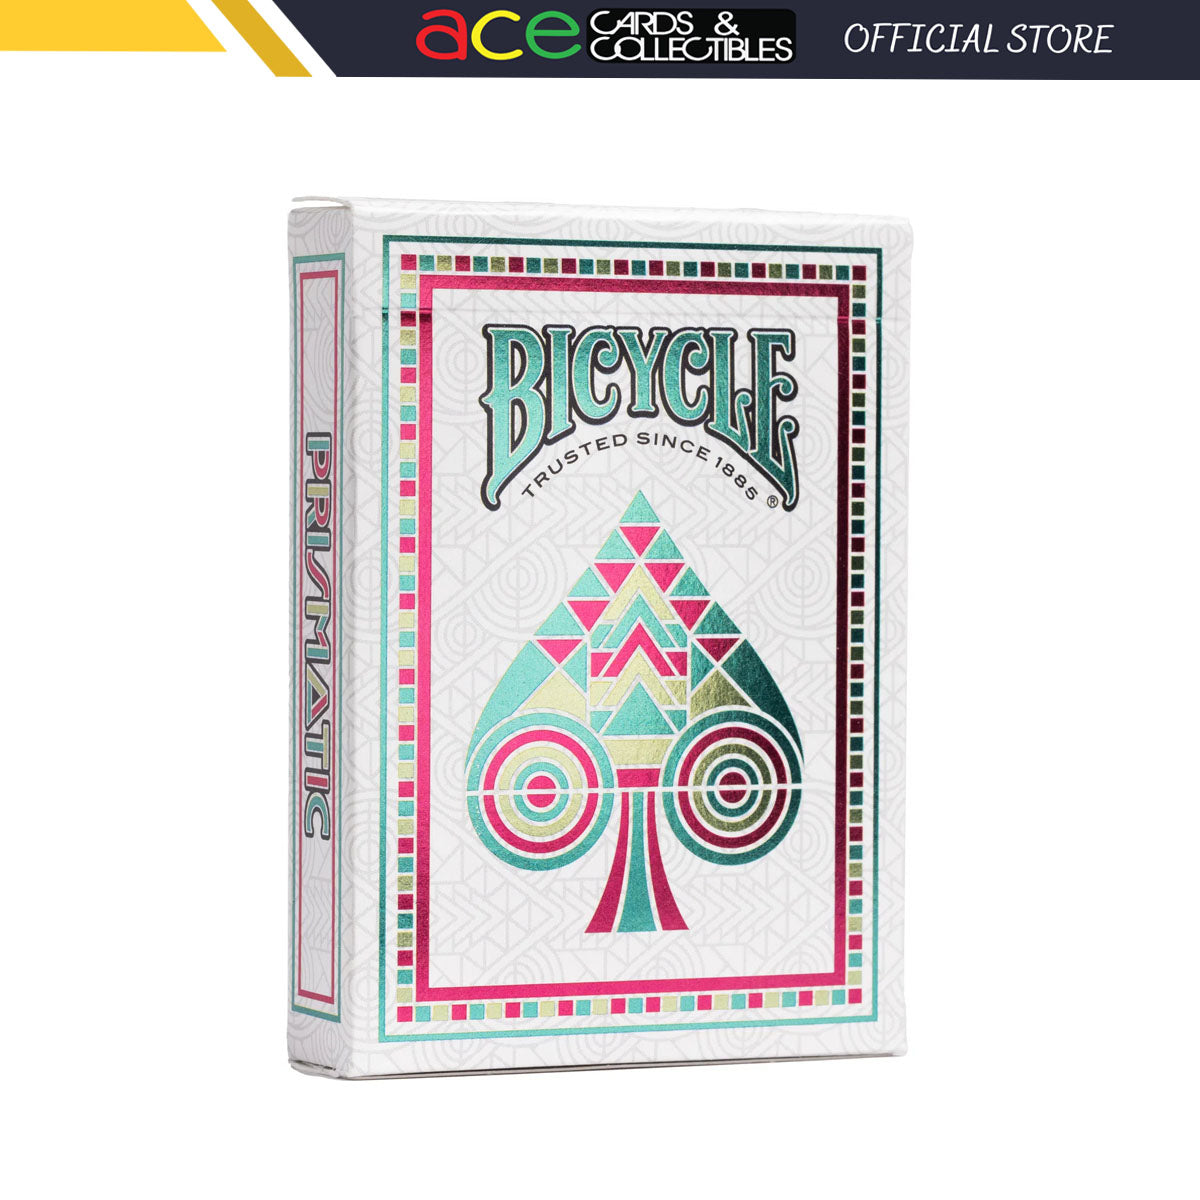 Bicycle Prismatic Playing Cards-United States Playing Cards Company-Ace Cards &amp; Collectibles